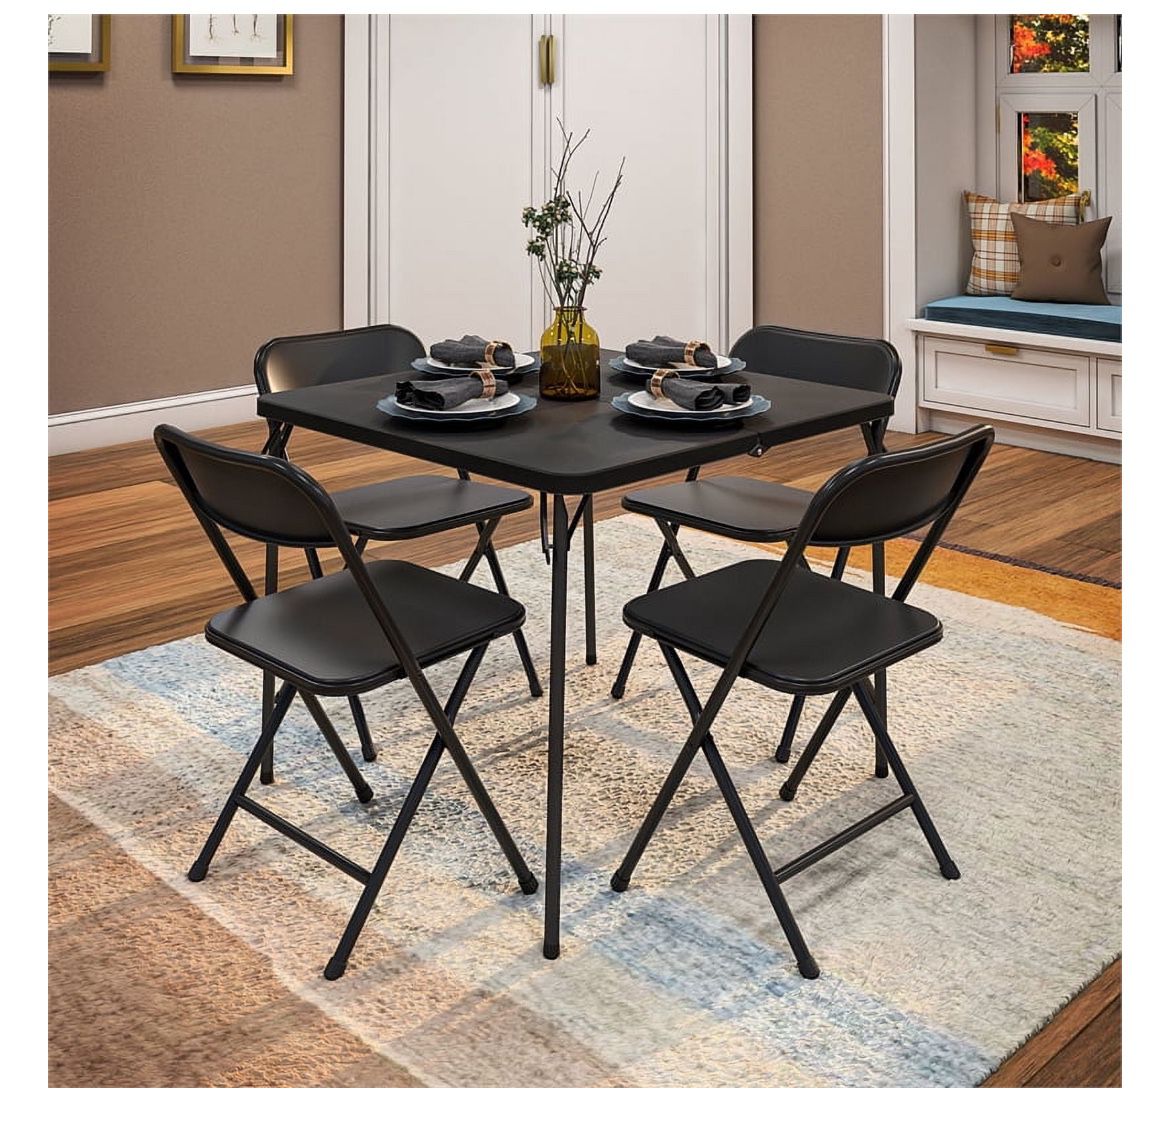 COSCO 5-Piece Solid Resin Folding Table & Chair Dining Set, Black, Indoor & Outdoor, Perfect for Everyday Use, Hosting, Game Night, or Holiday Celebra